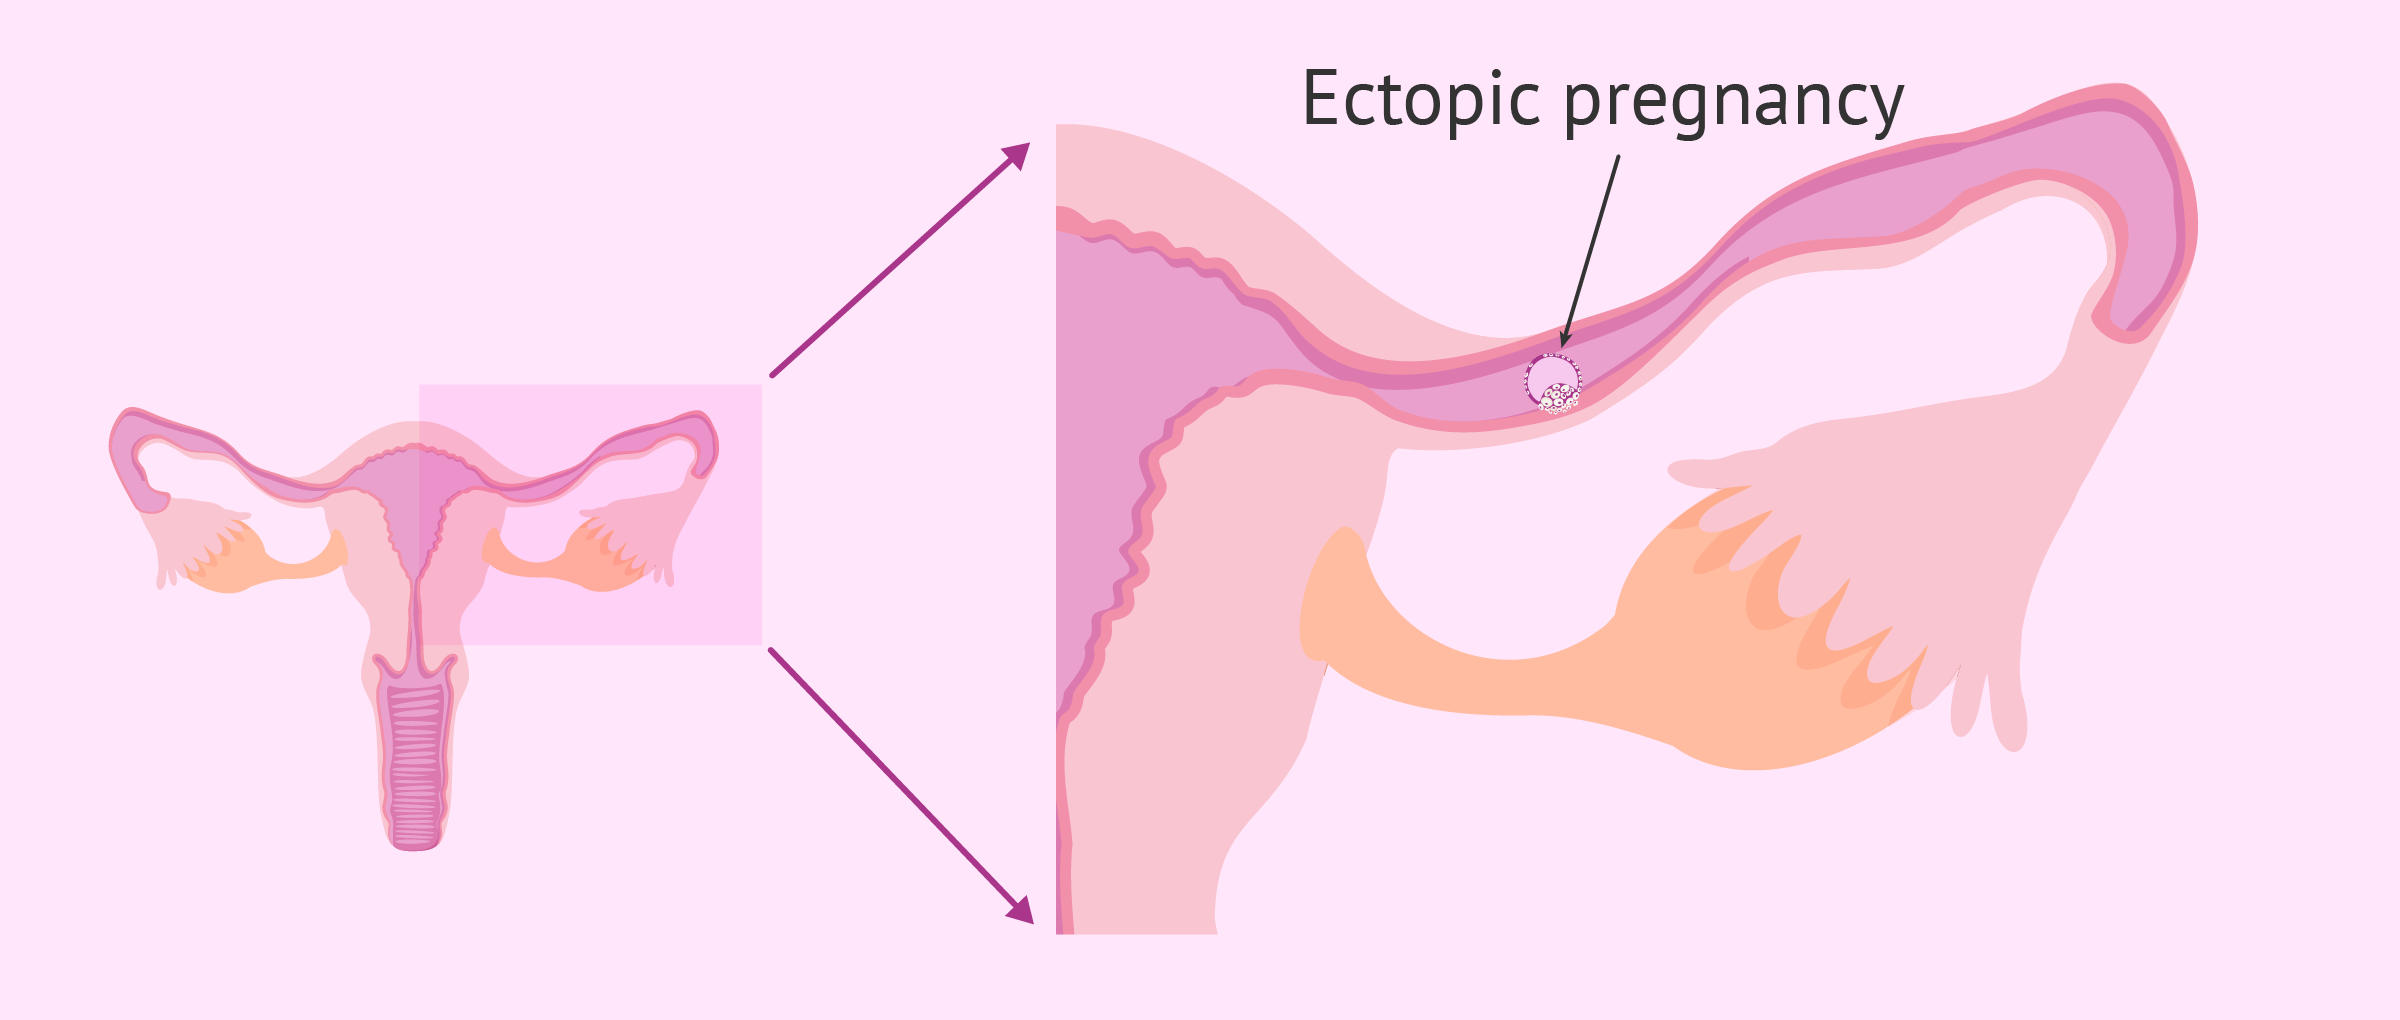 Ectopic pregnancy after intrauterine insemination